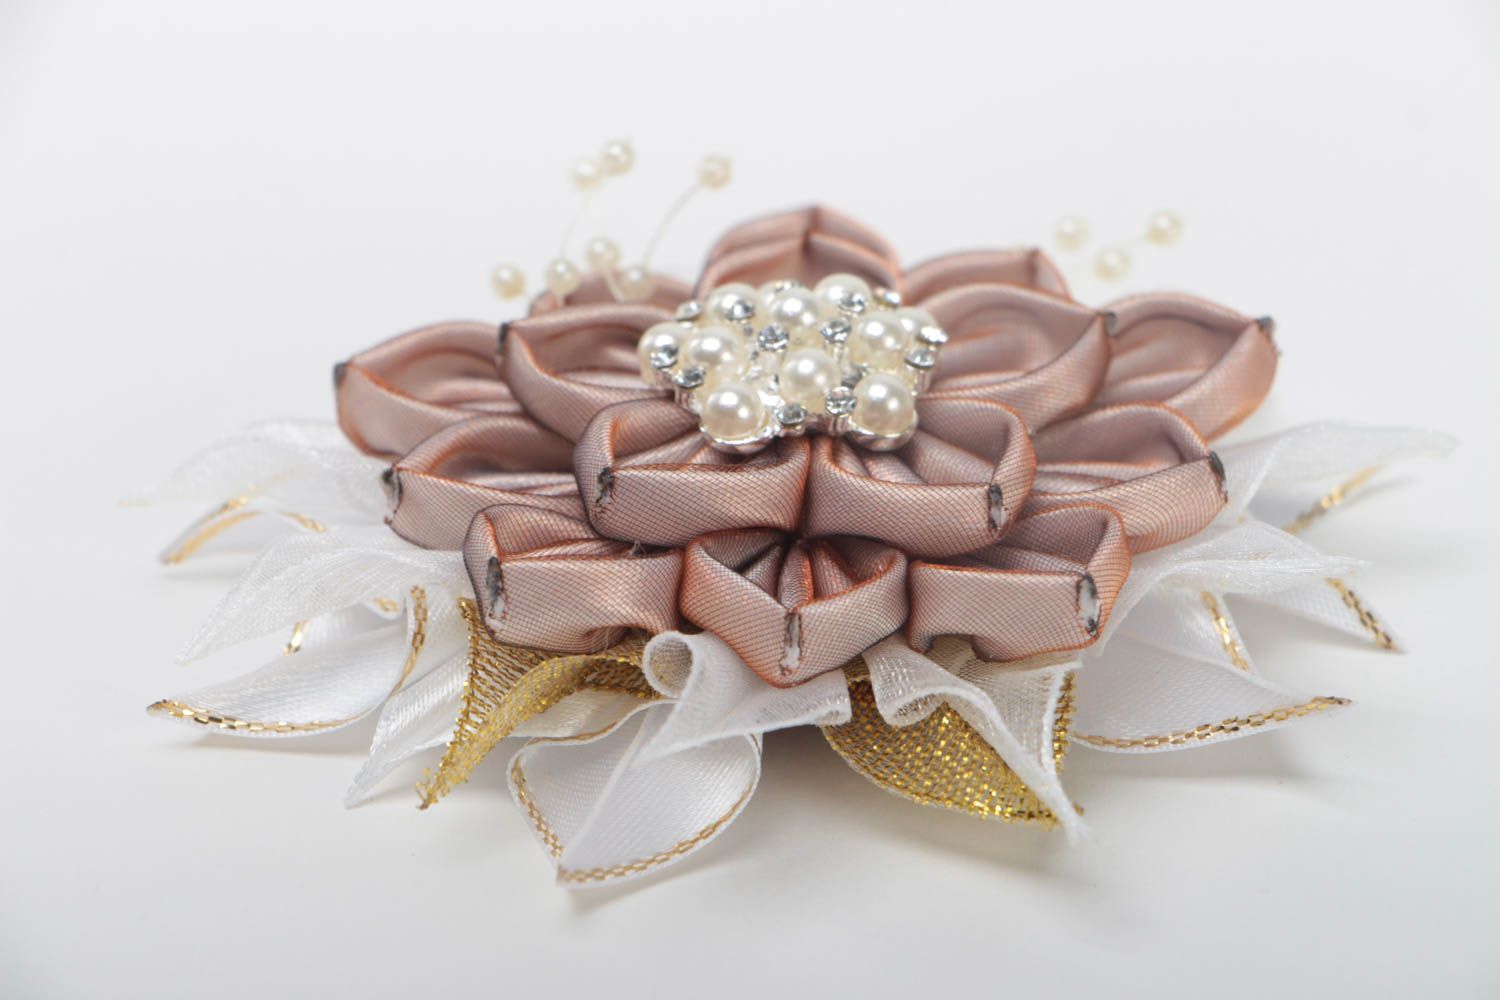 Handmade textile brooch for women kanzashi flower adornment gifts for her photo 3